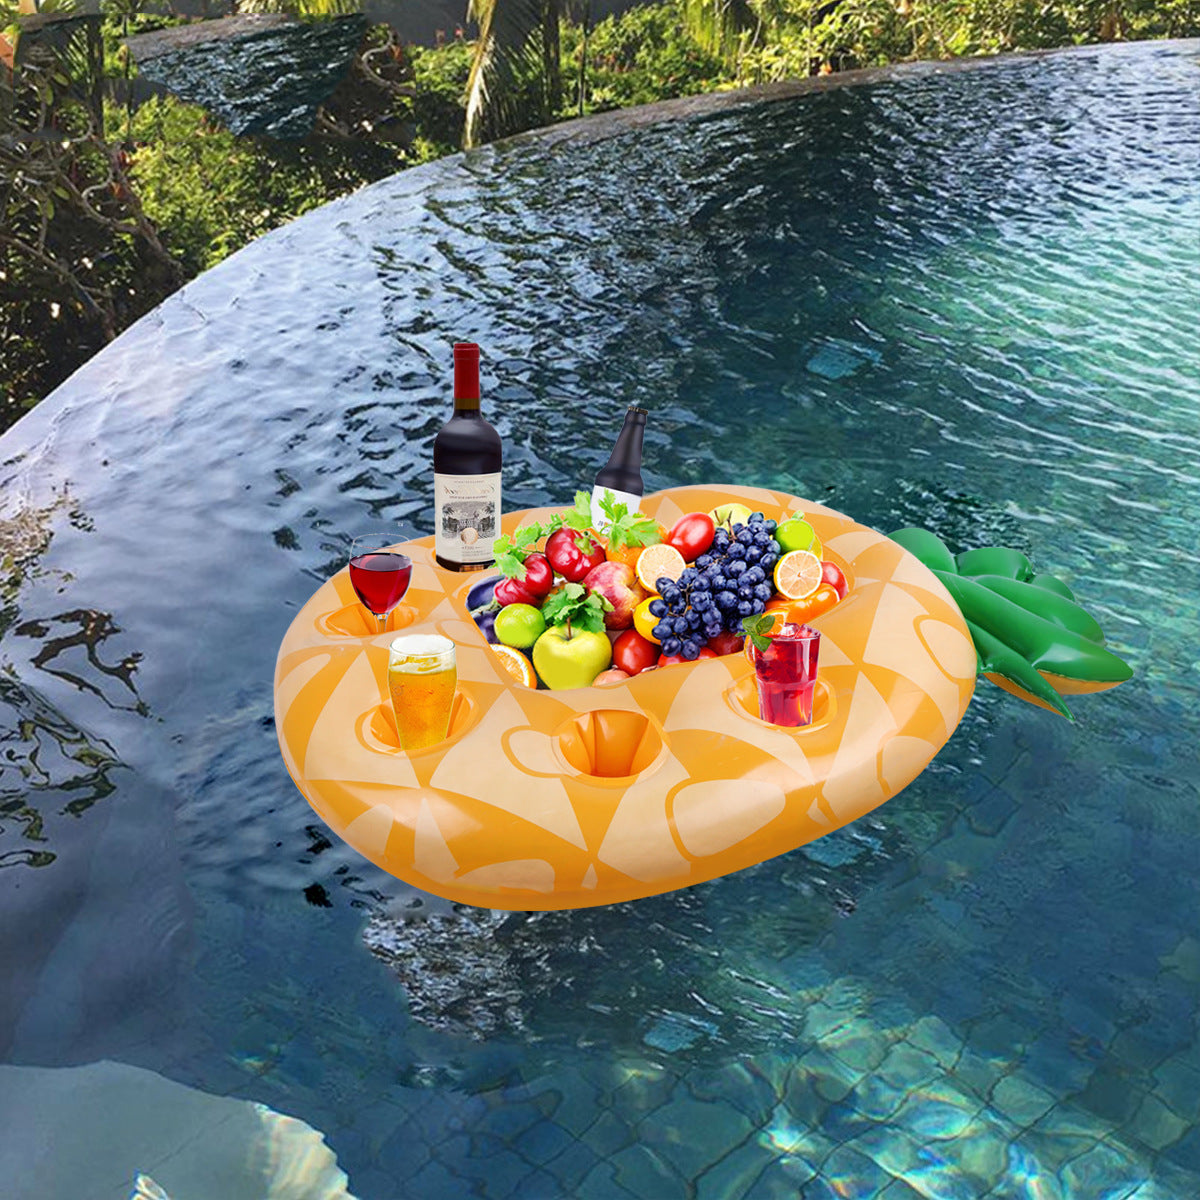 Inflatable Pineapple Drink Holder Swimming Pool Float